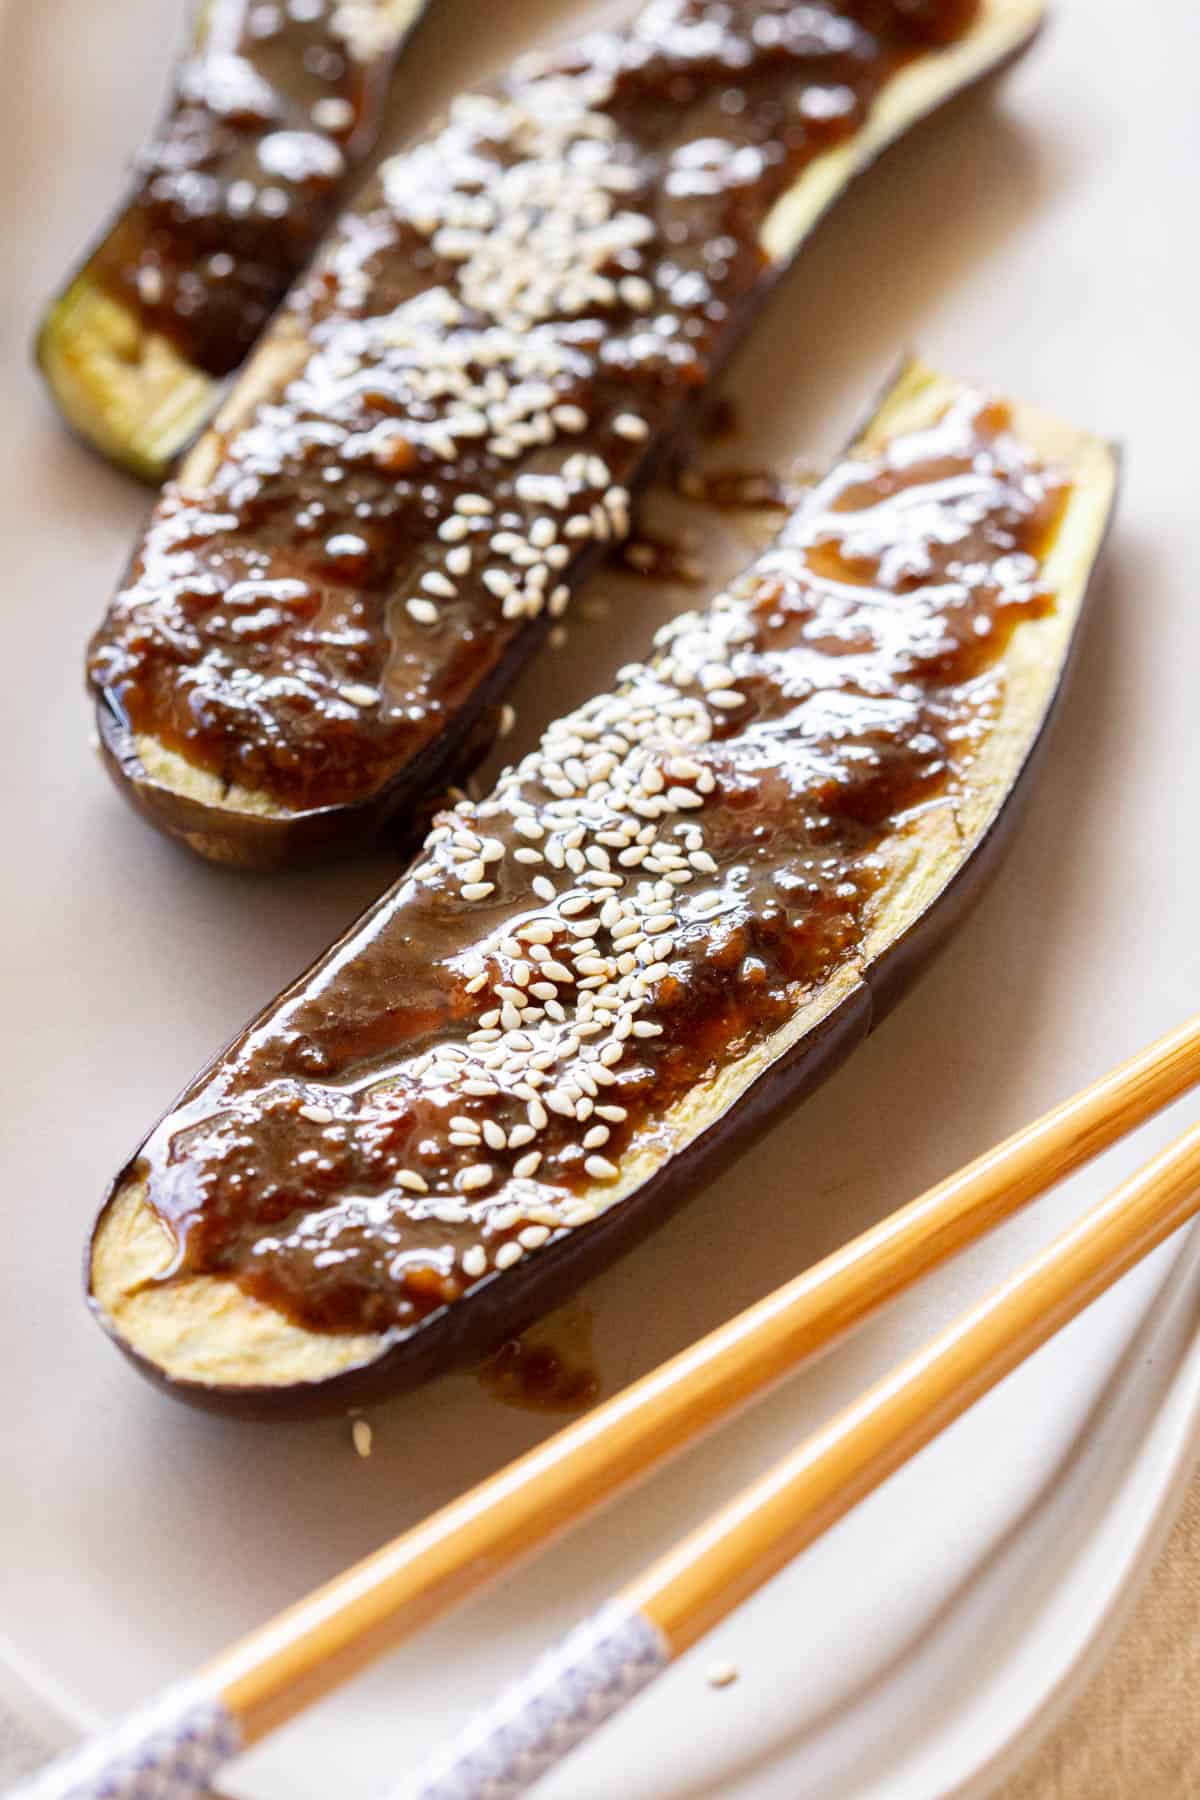 Slices of eggplant topped with a miso glaze and sesame seeds.